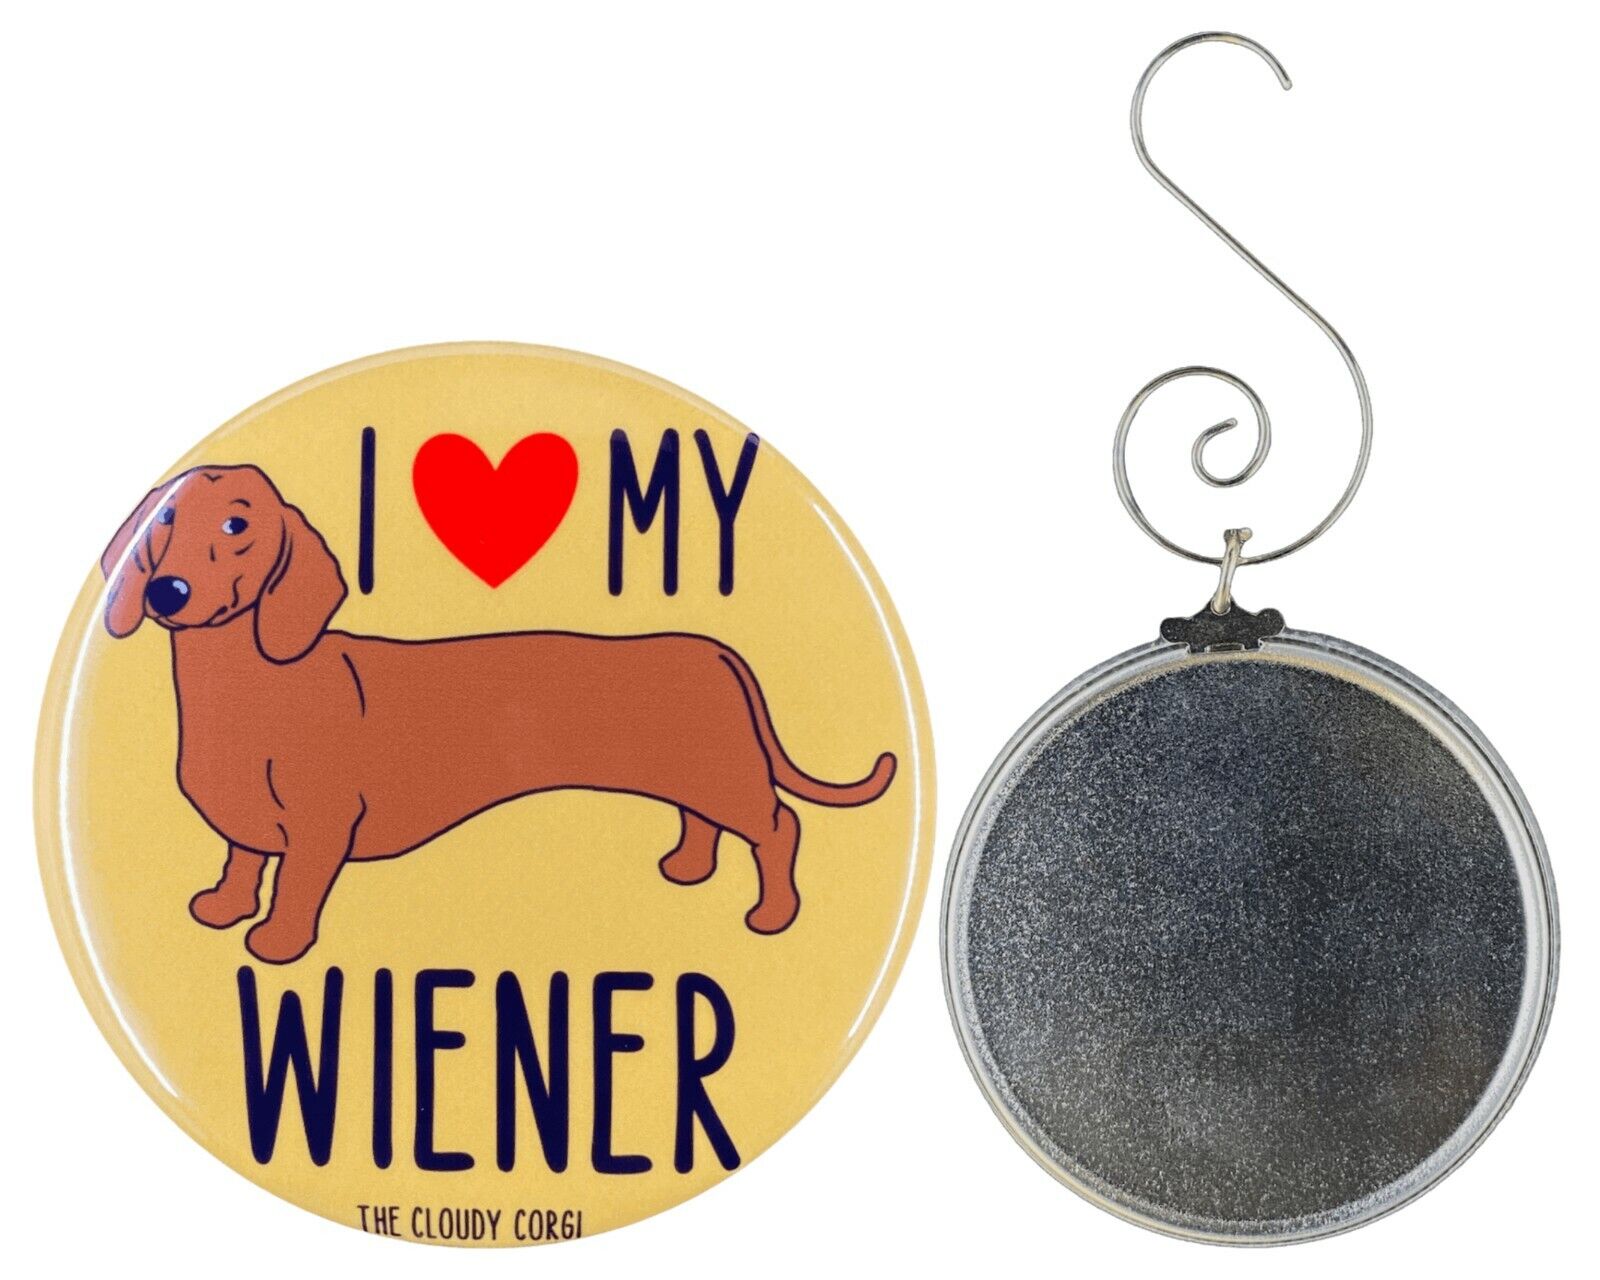 Dachshund I Love My Wiener Dog Ornament Decor Gift and Collectible Accessories